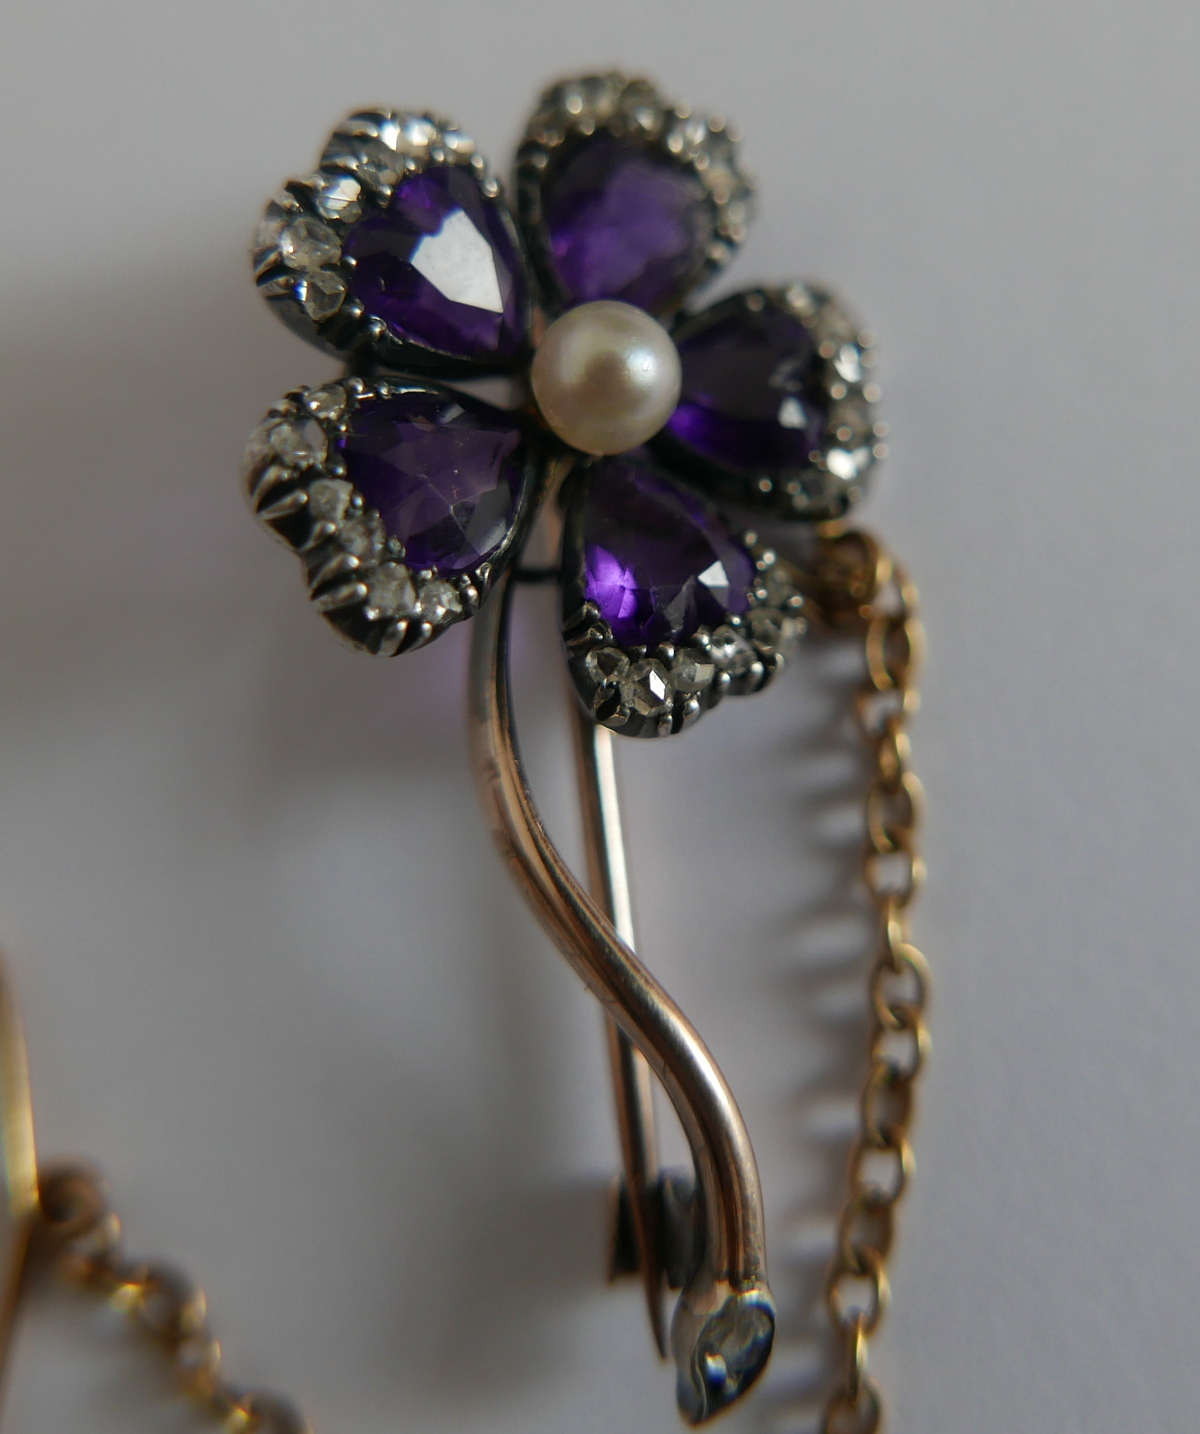 Antique Diamond-Amethyst and Pearl Brooch 34mm x 18mm. - Image 2 of 4